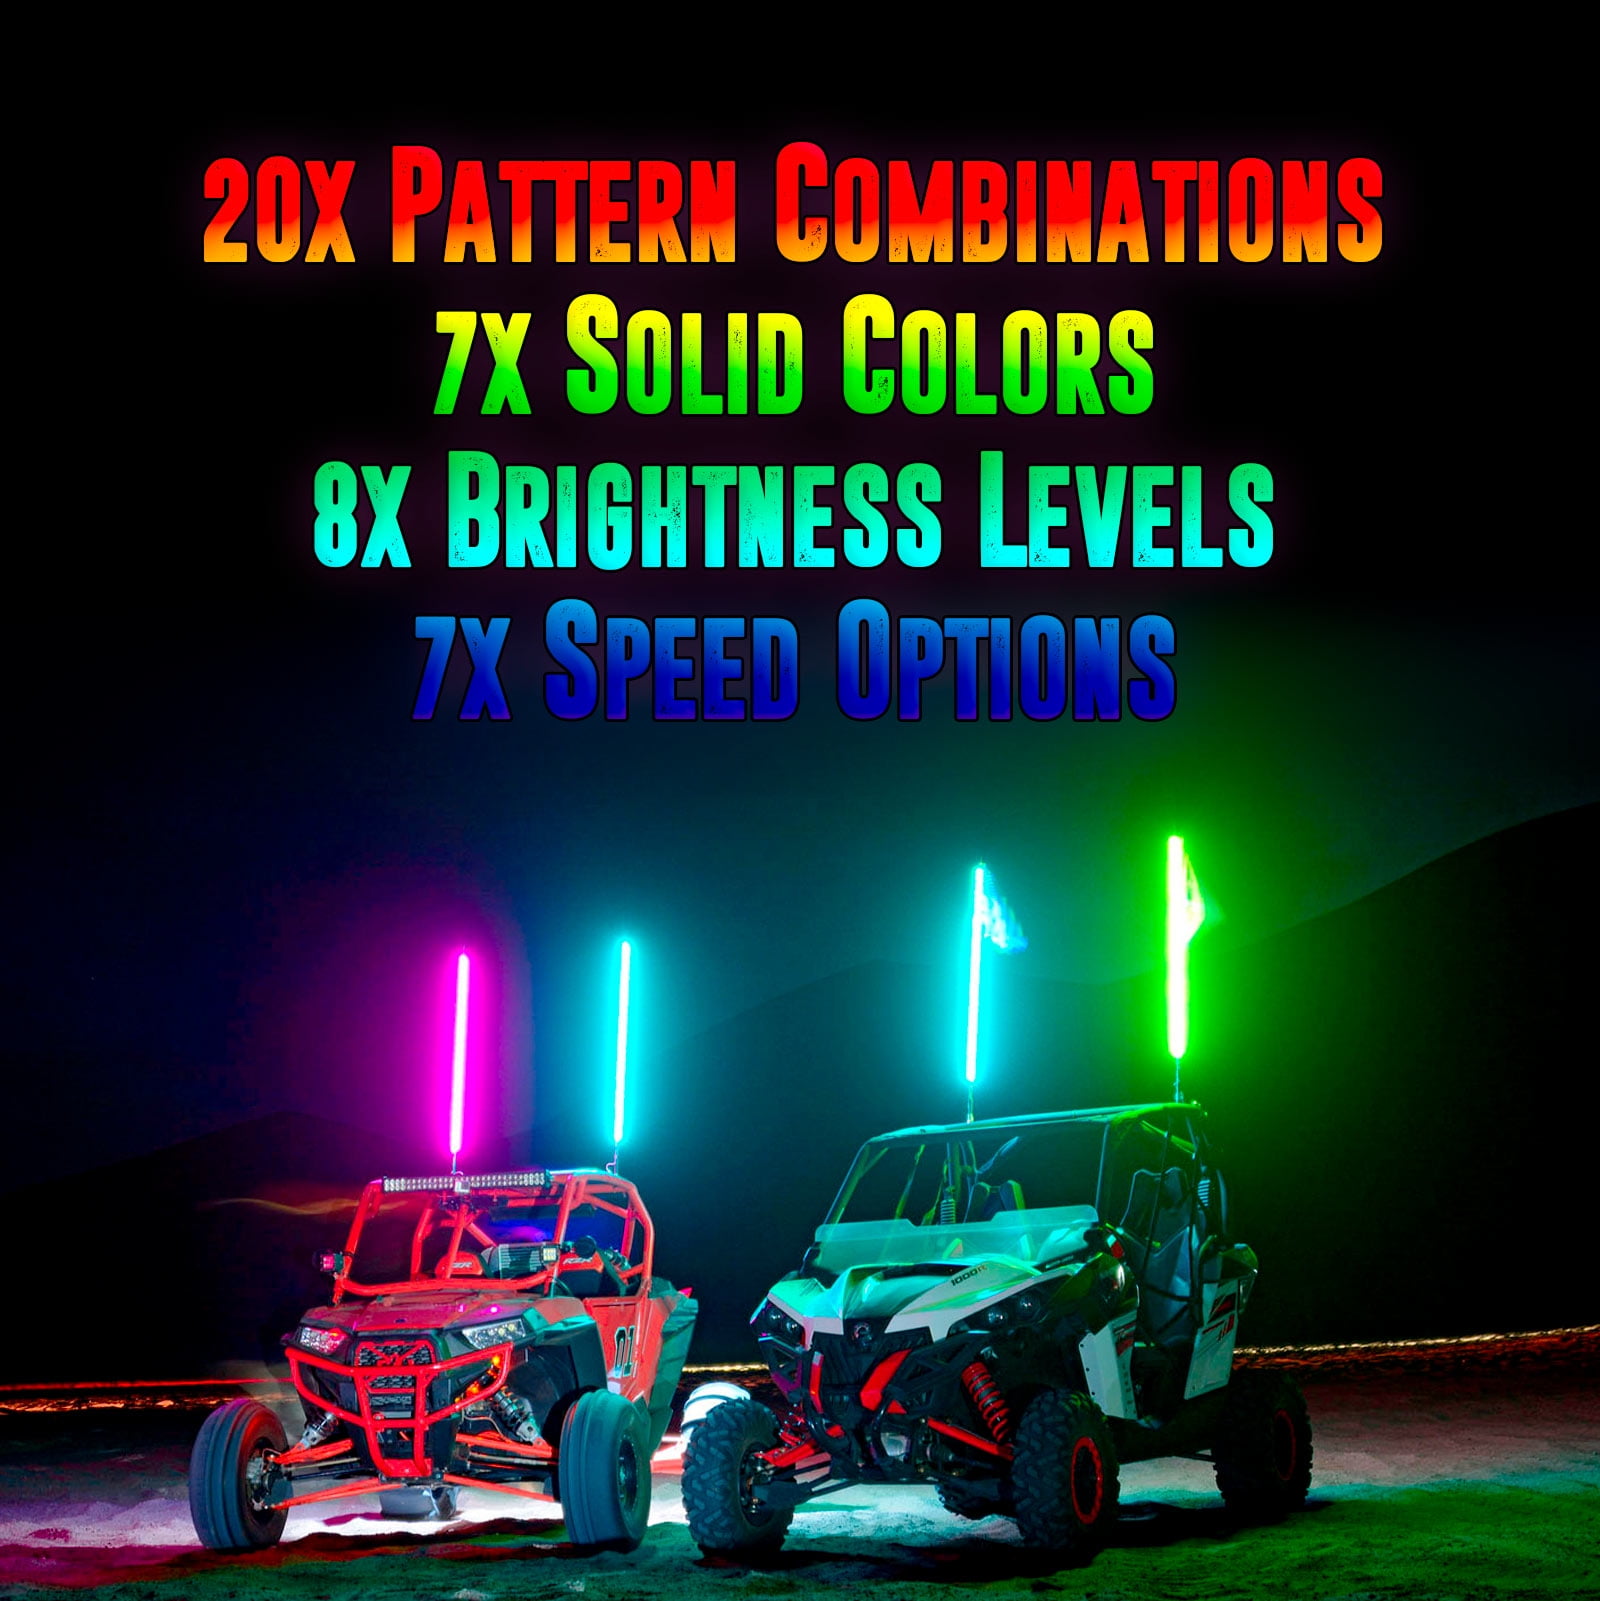 RZR 3ft Multi-Color LED Whip Light with Remote Control and American USA Flag Trucks LED Antenna Whip Light for Sand Dune Buggy Jeep UTV and Other Off-Road Vehicles ATV 